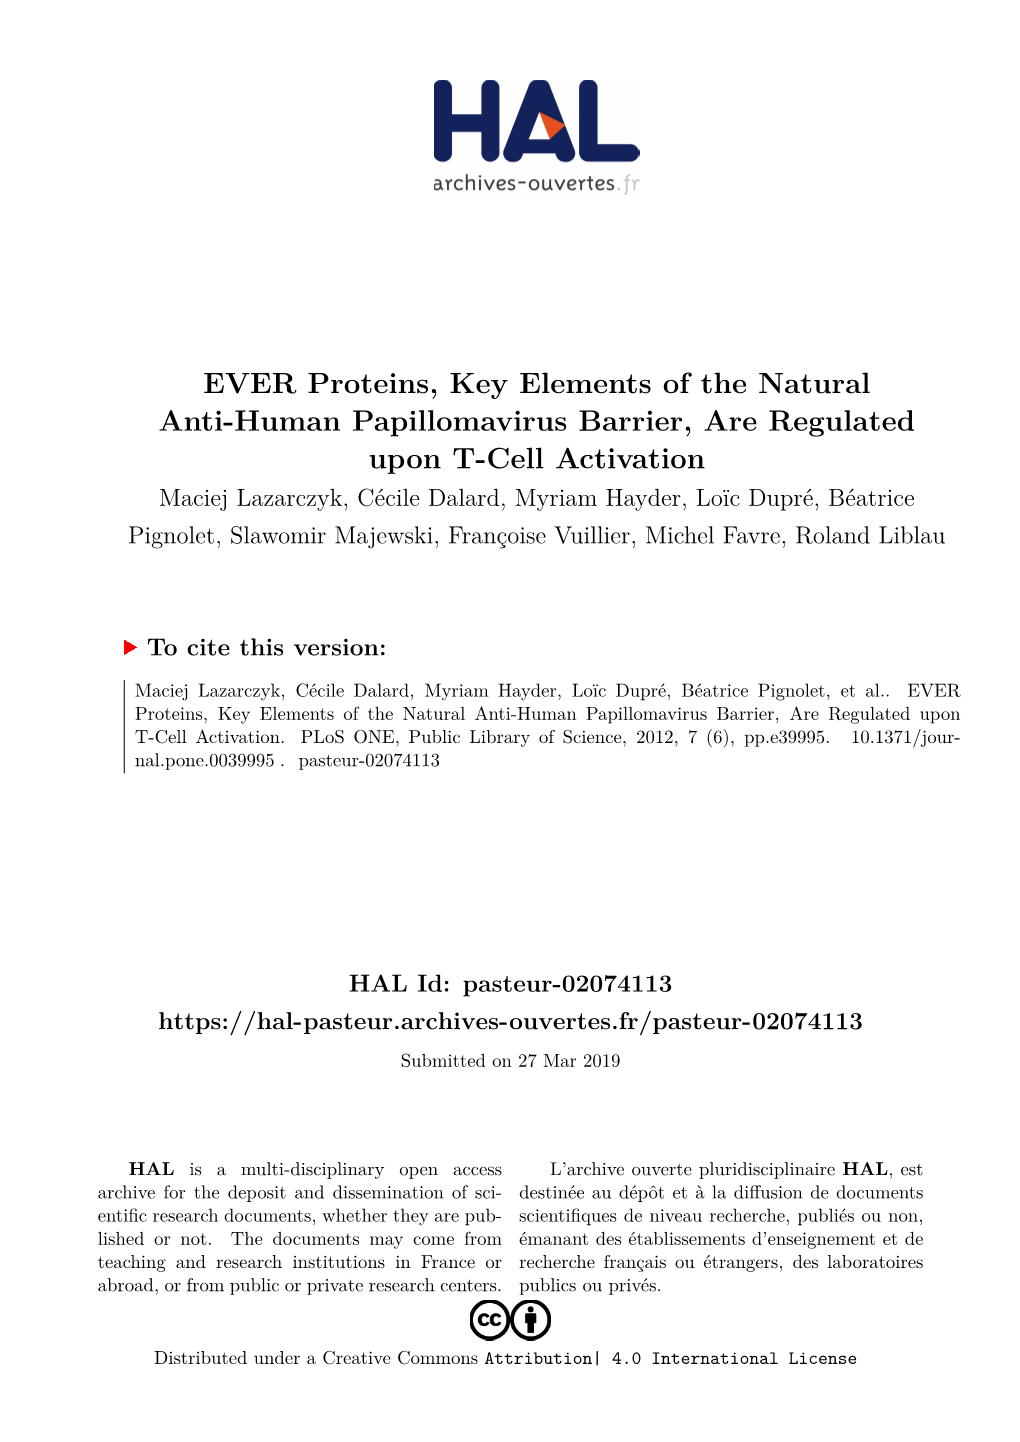 EVER Proteins, Key Elements of the Natural Anti-Human